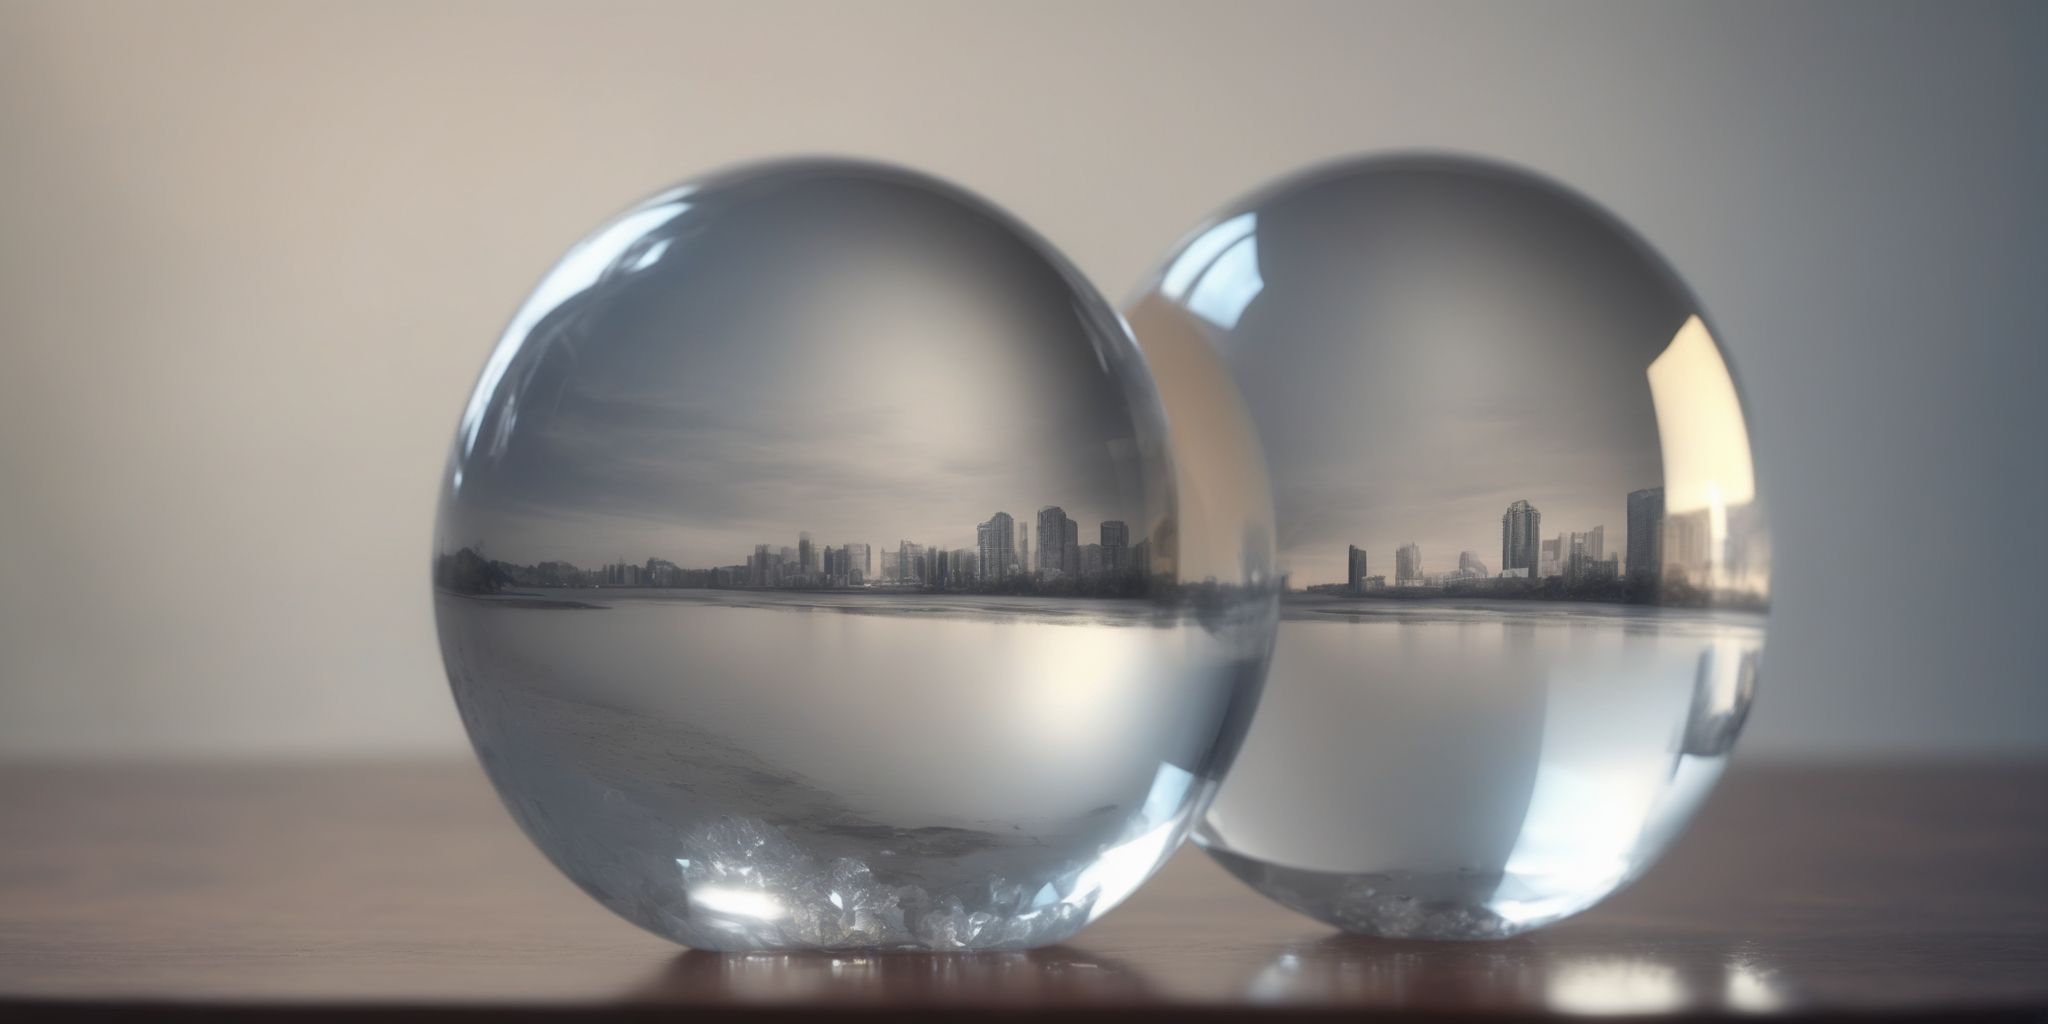 Crystal ball  in realistic, photographic style